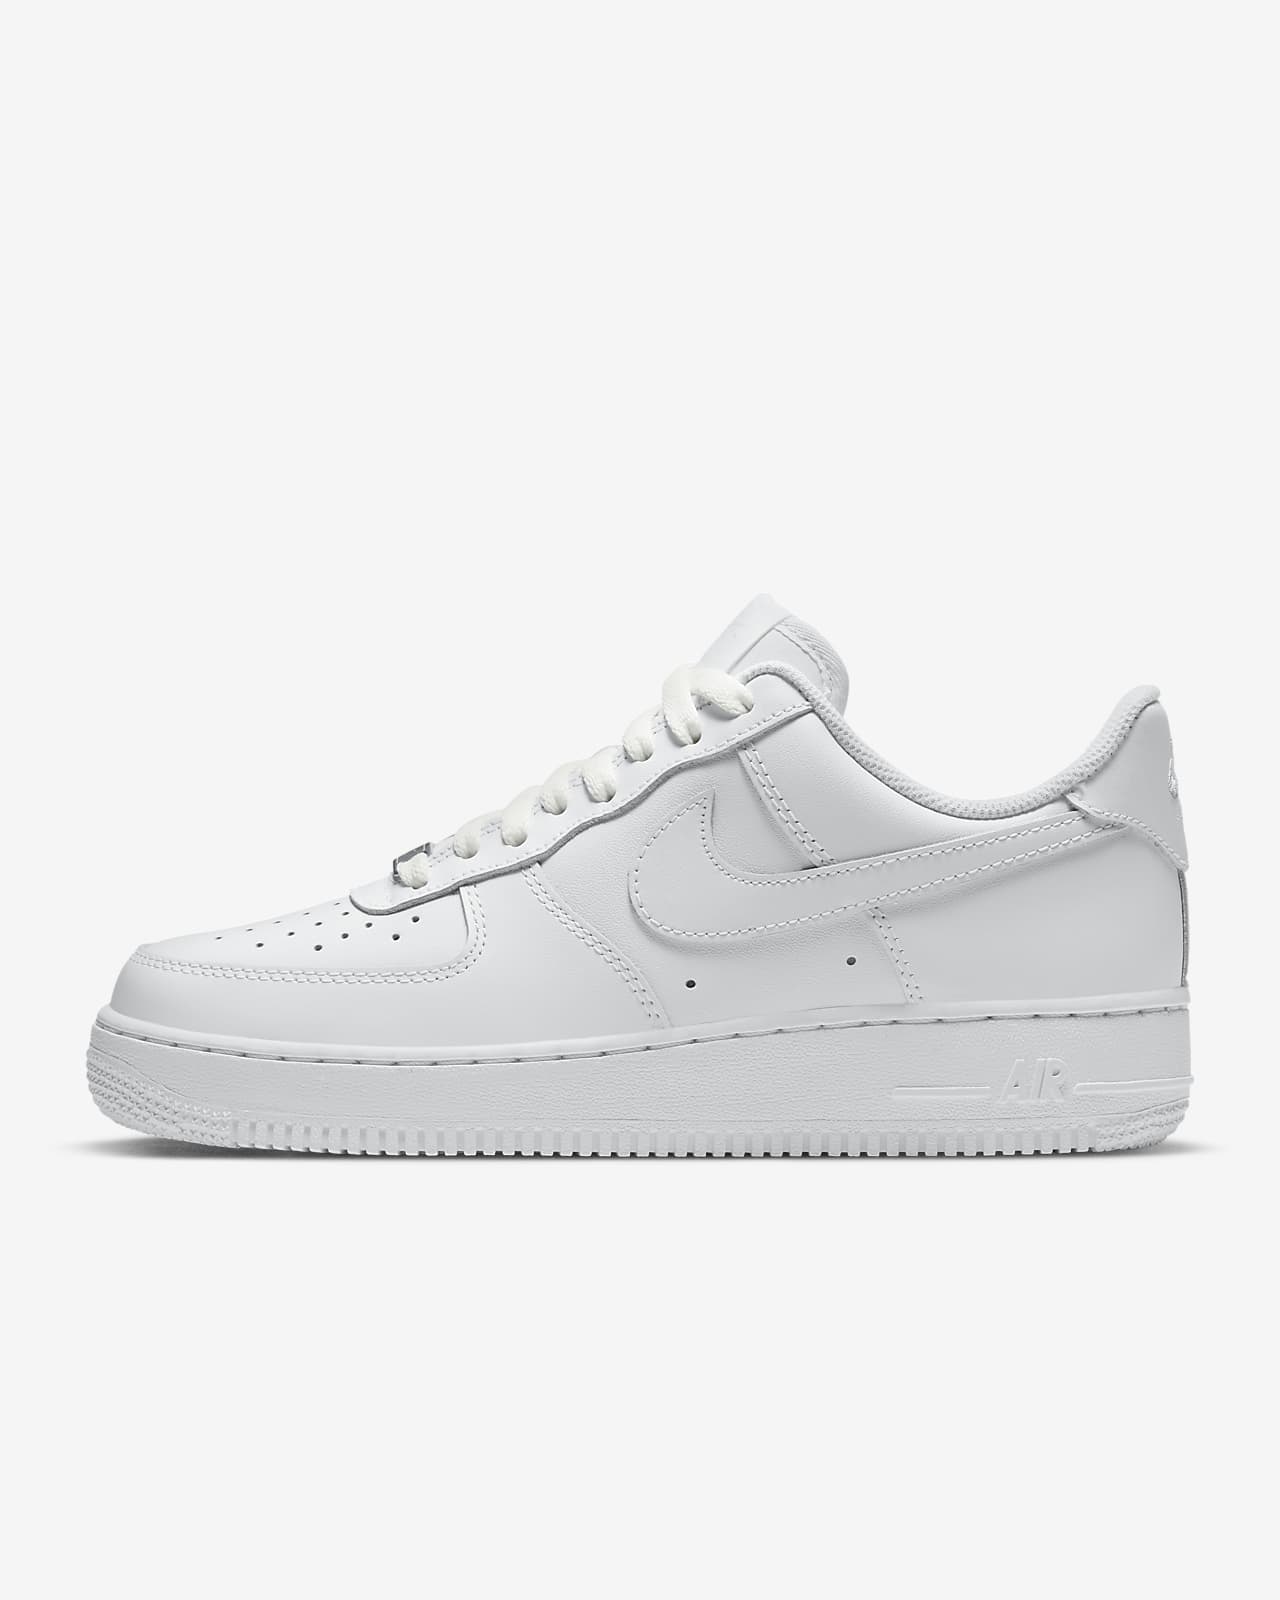 bark Recommendation tool Nike Air Force 1 '07 Women's Shoes. Nike.com